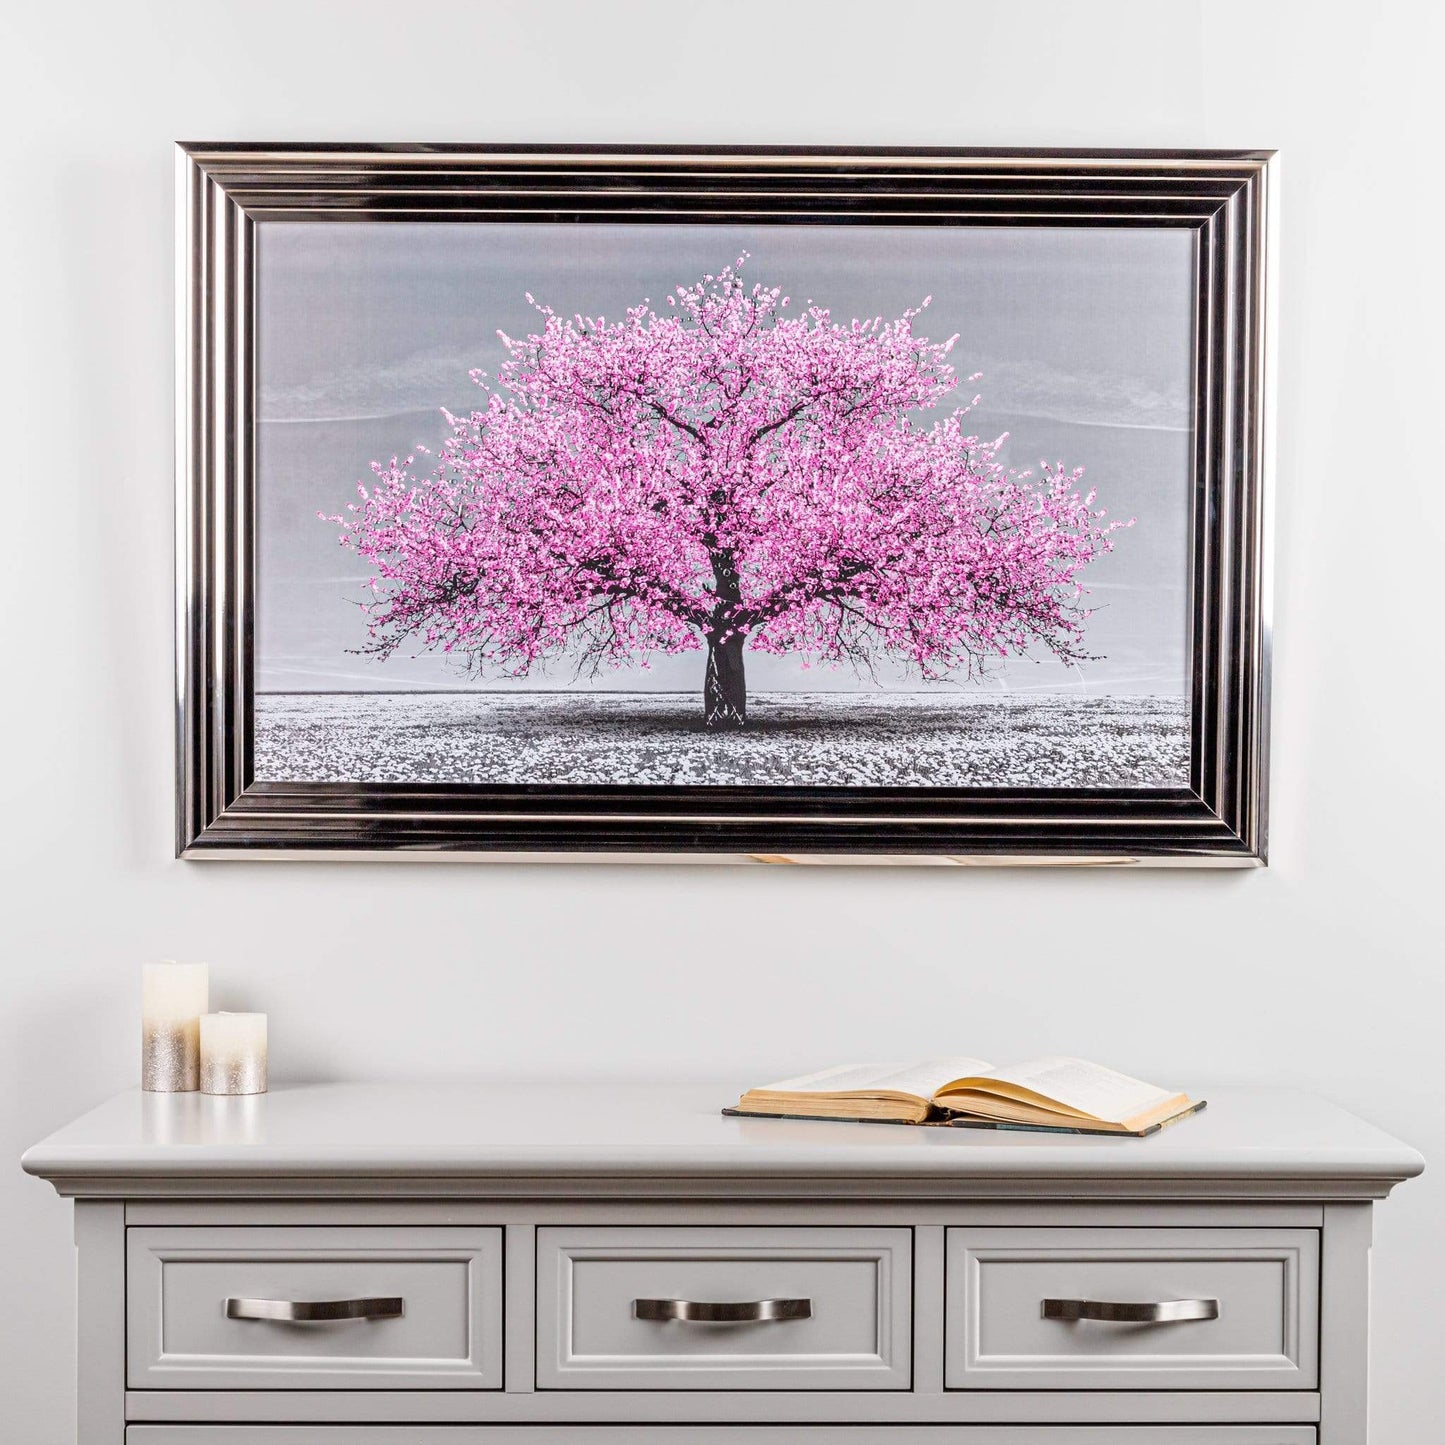 Pictures  -  Pink Cherry Tree Framed Picture 114Cm X 74Cm  -  50152122